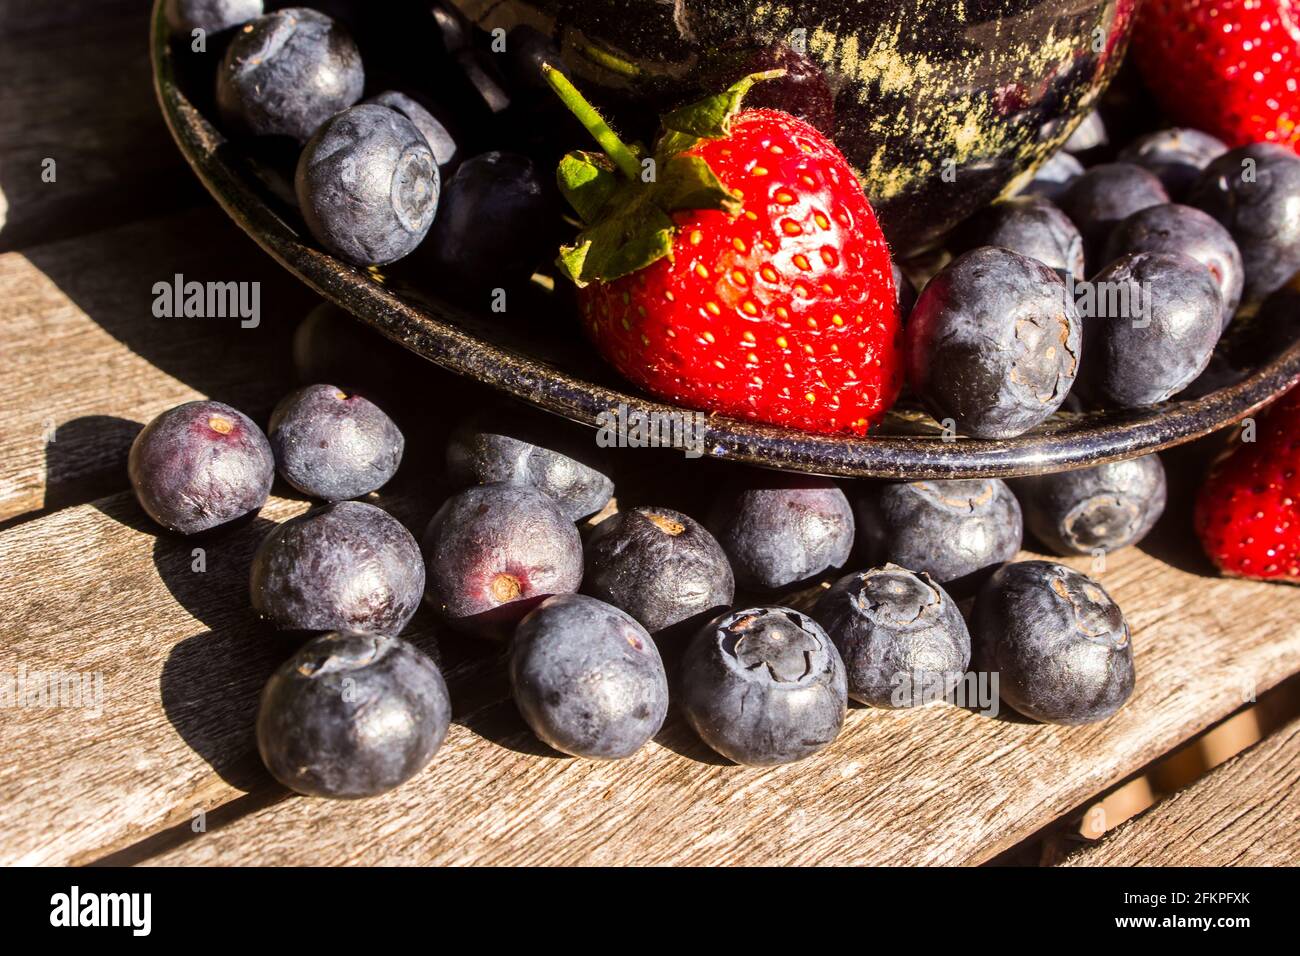 Blue berries on a weathered wooden tabletop in front of a saucer filled with both blueberries and strawberries Stock Photo